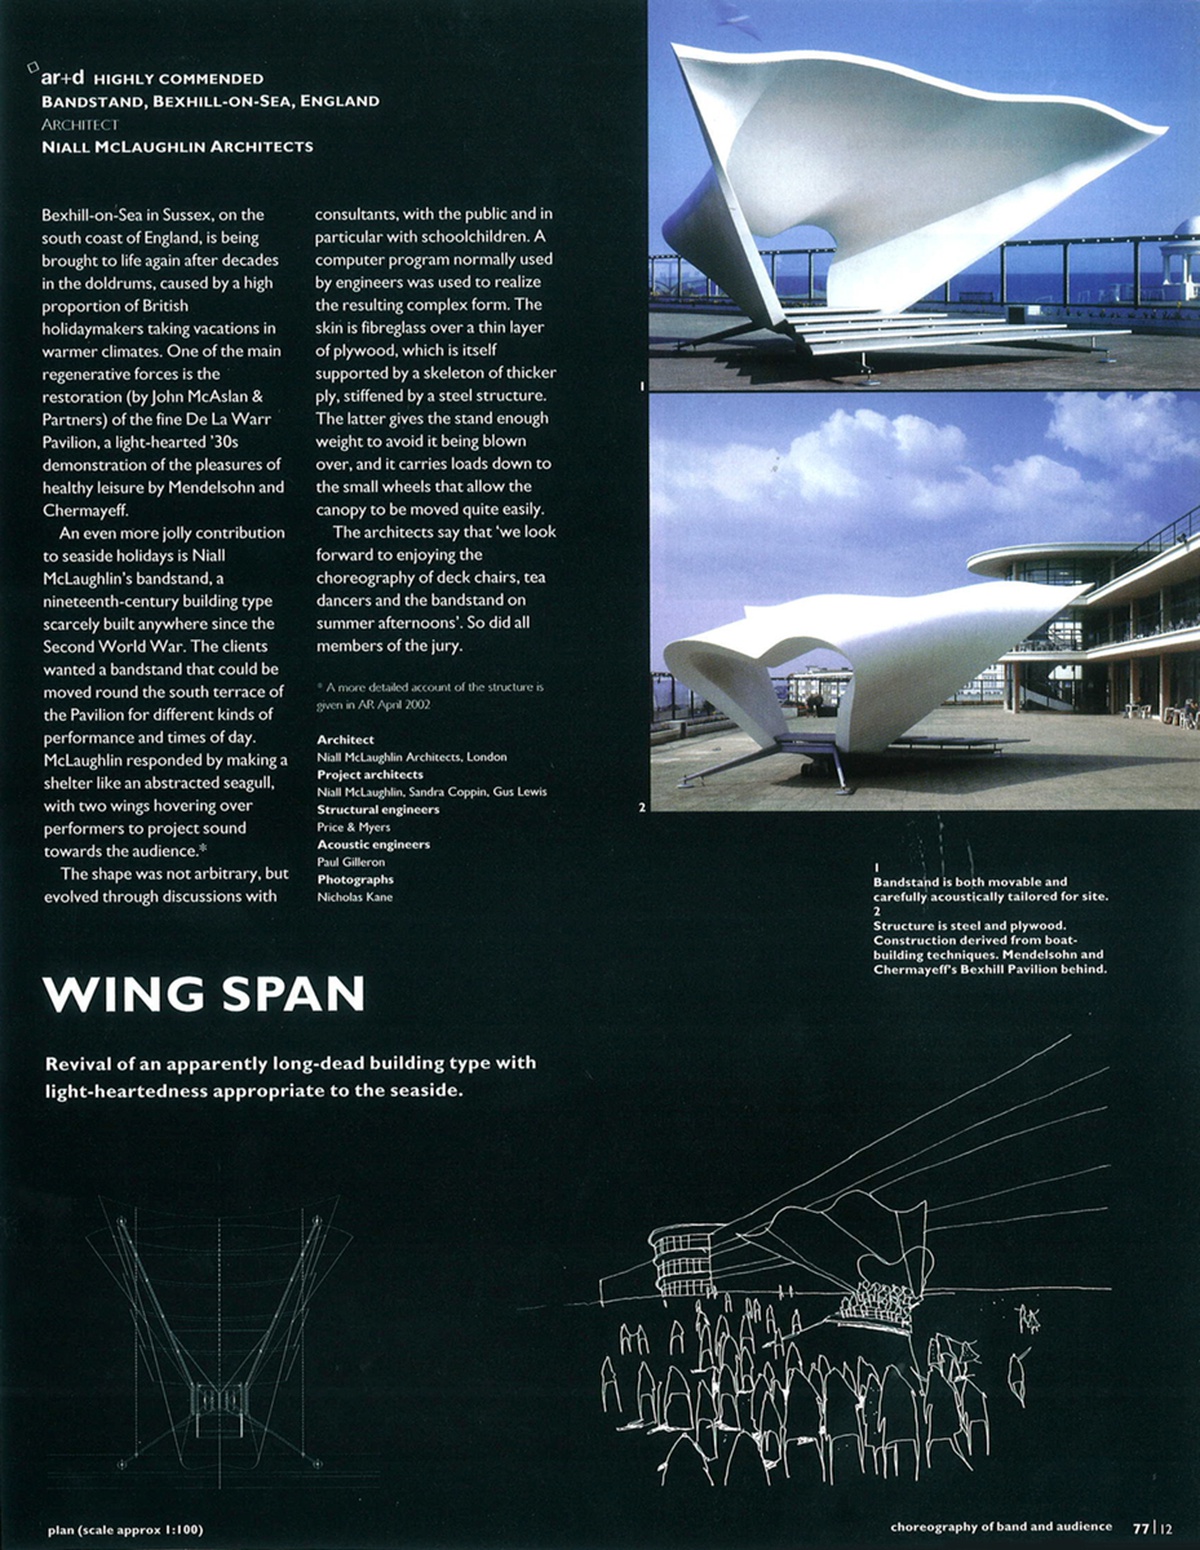 Wingspan, AR+d Highly Commended - Architectural Review